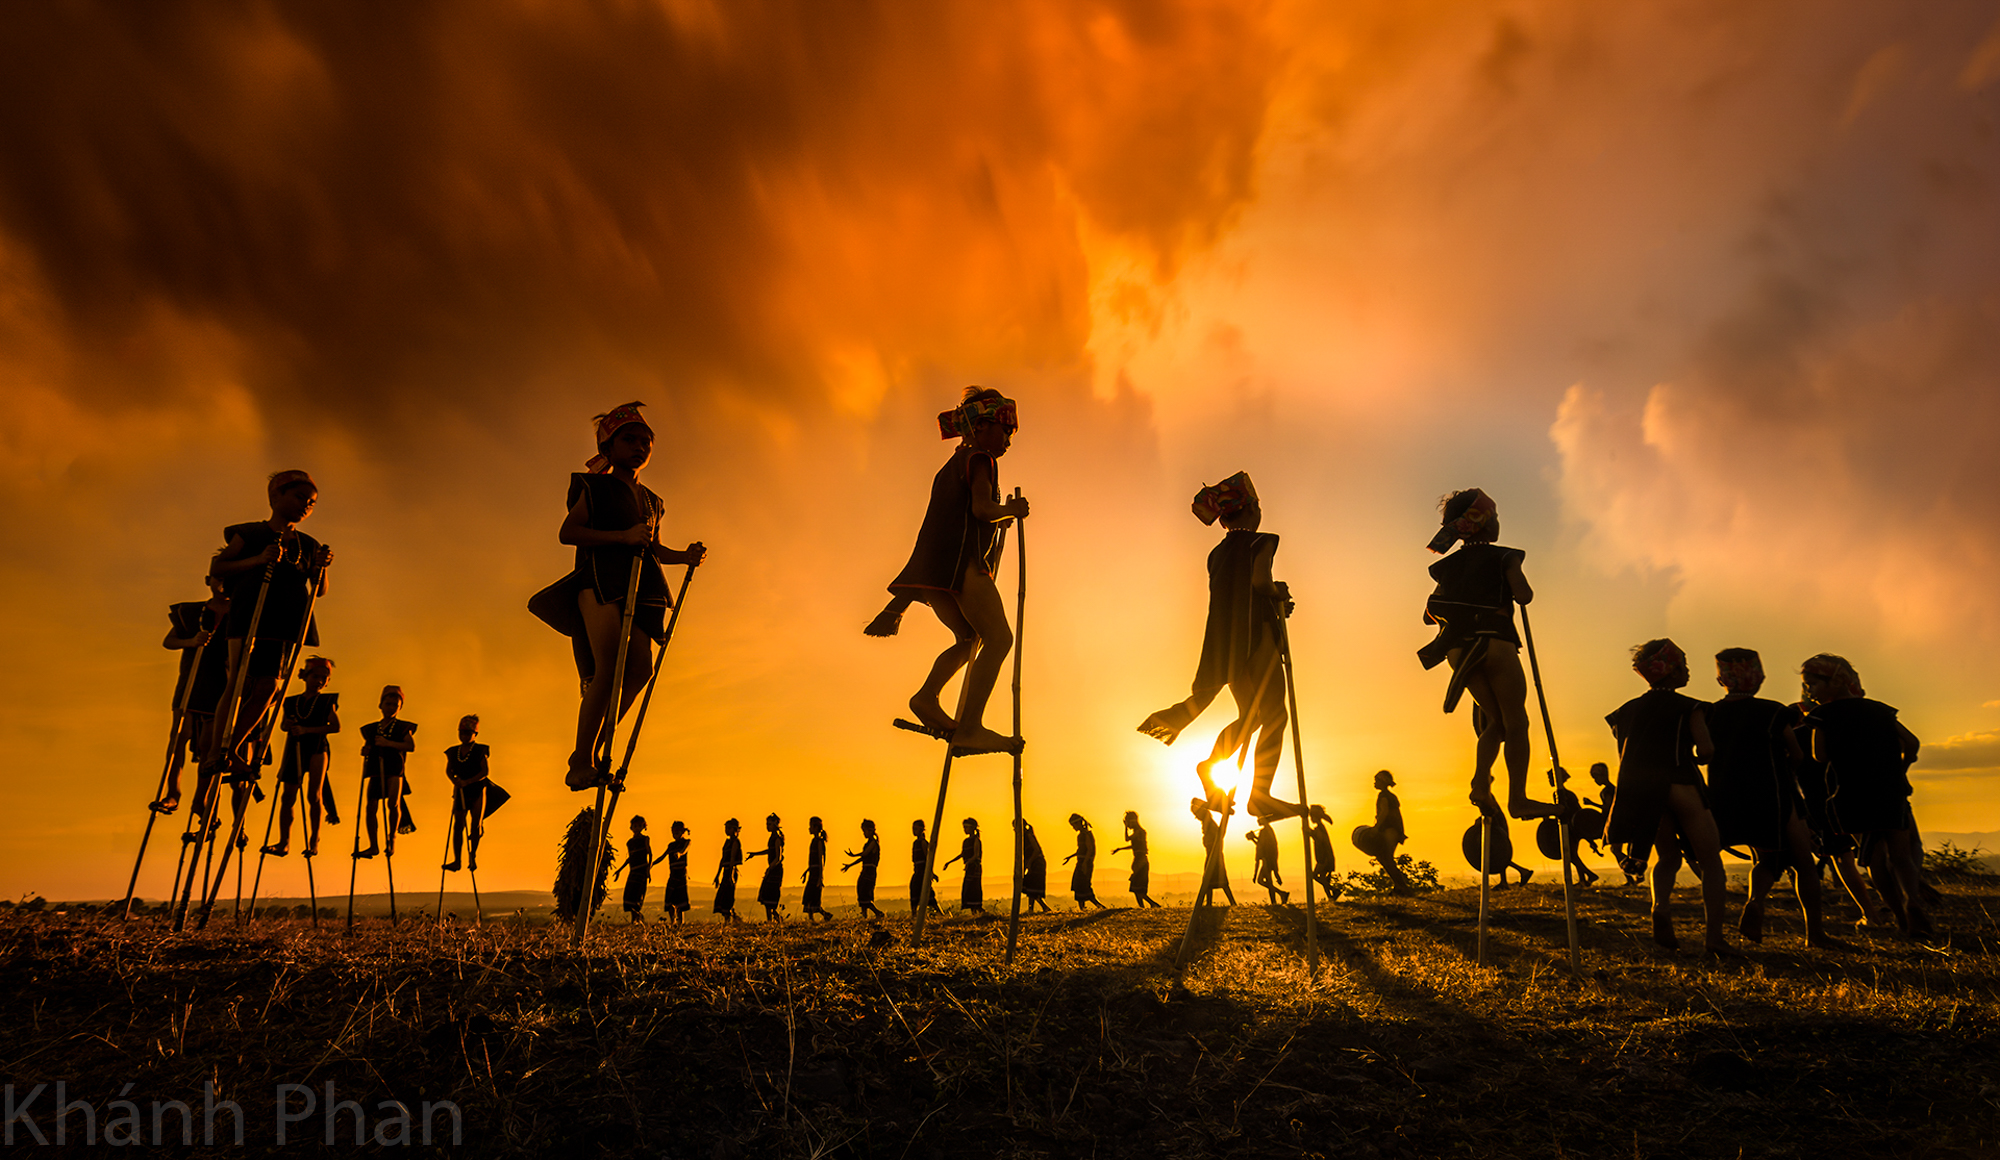 ‘Children dancing with gongs,’ a photo capturing children dancing with gongs at a festival in Gia Lai, which was listed among the 2020 world's best photos of golden hour by Agora. Photo: Khanh Phan